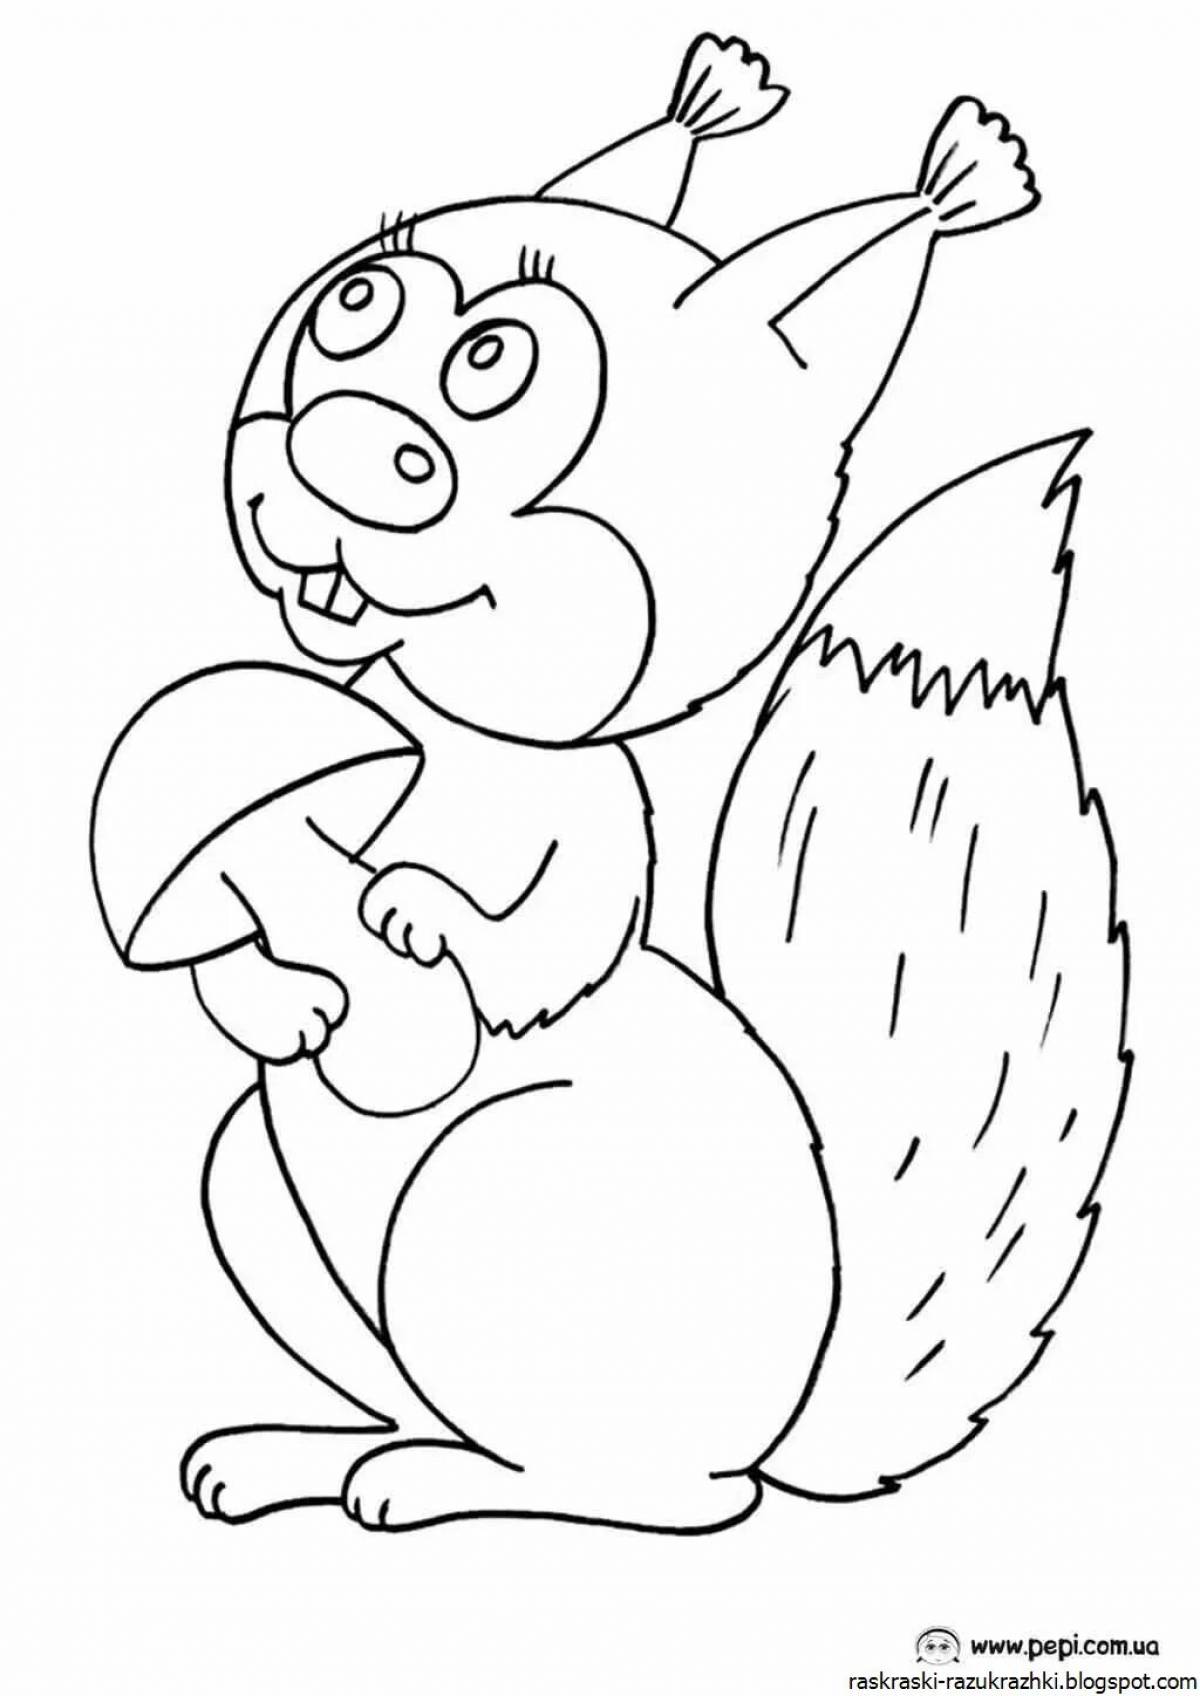 Fun coloring squirrel for children 2-3 years old